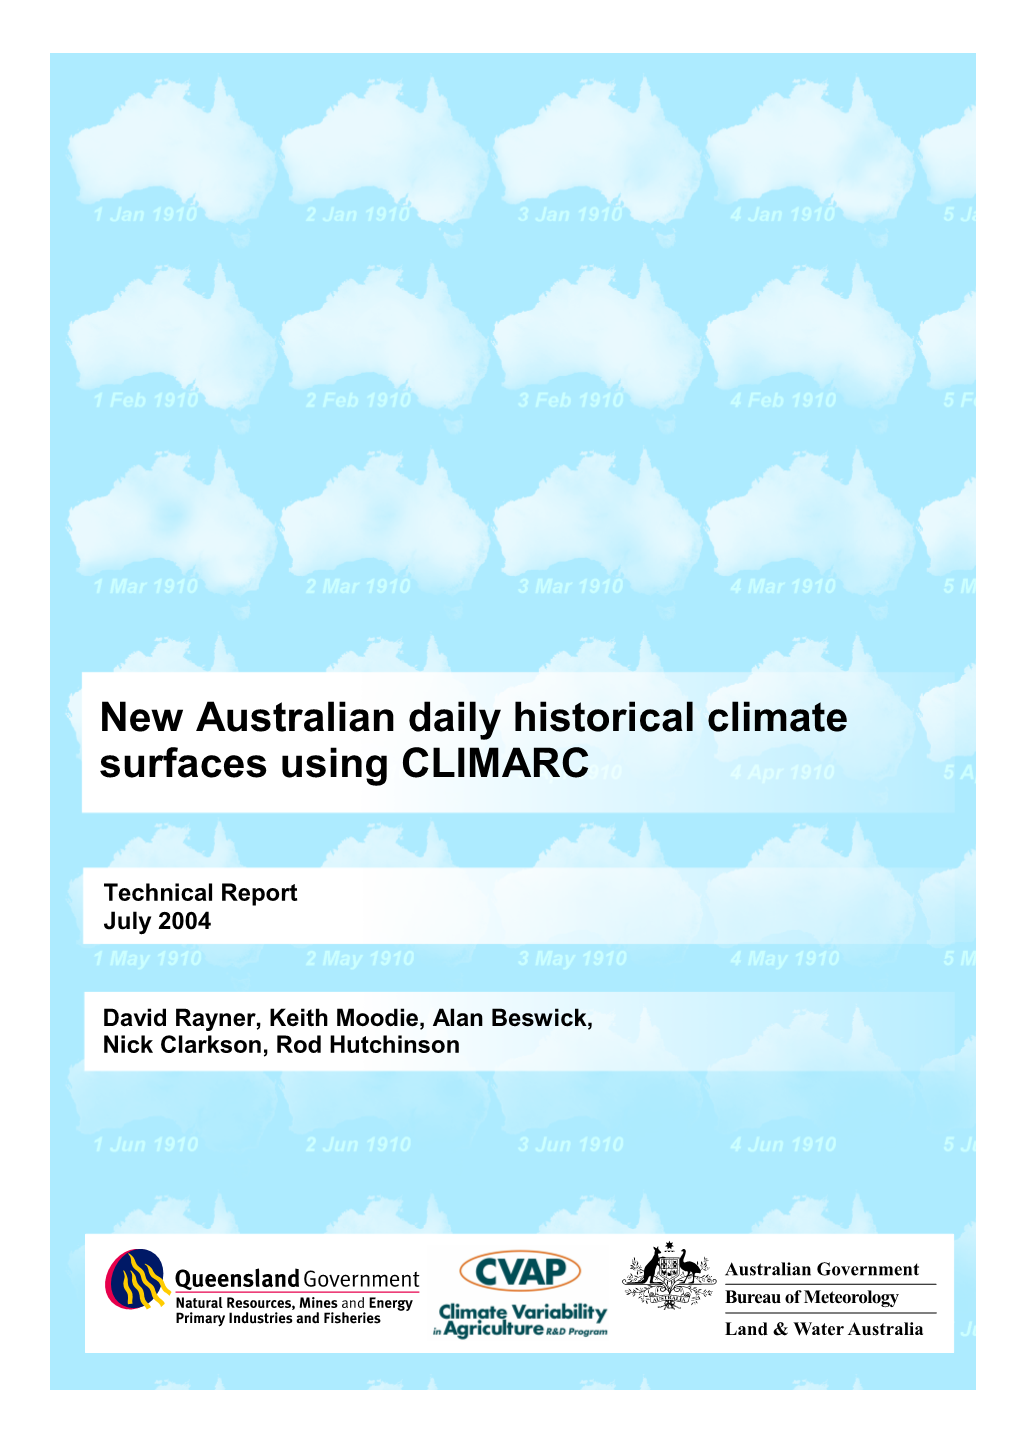 New Australian Daily Historical Climate Surfaces Using CLIMARC